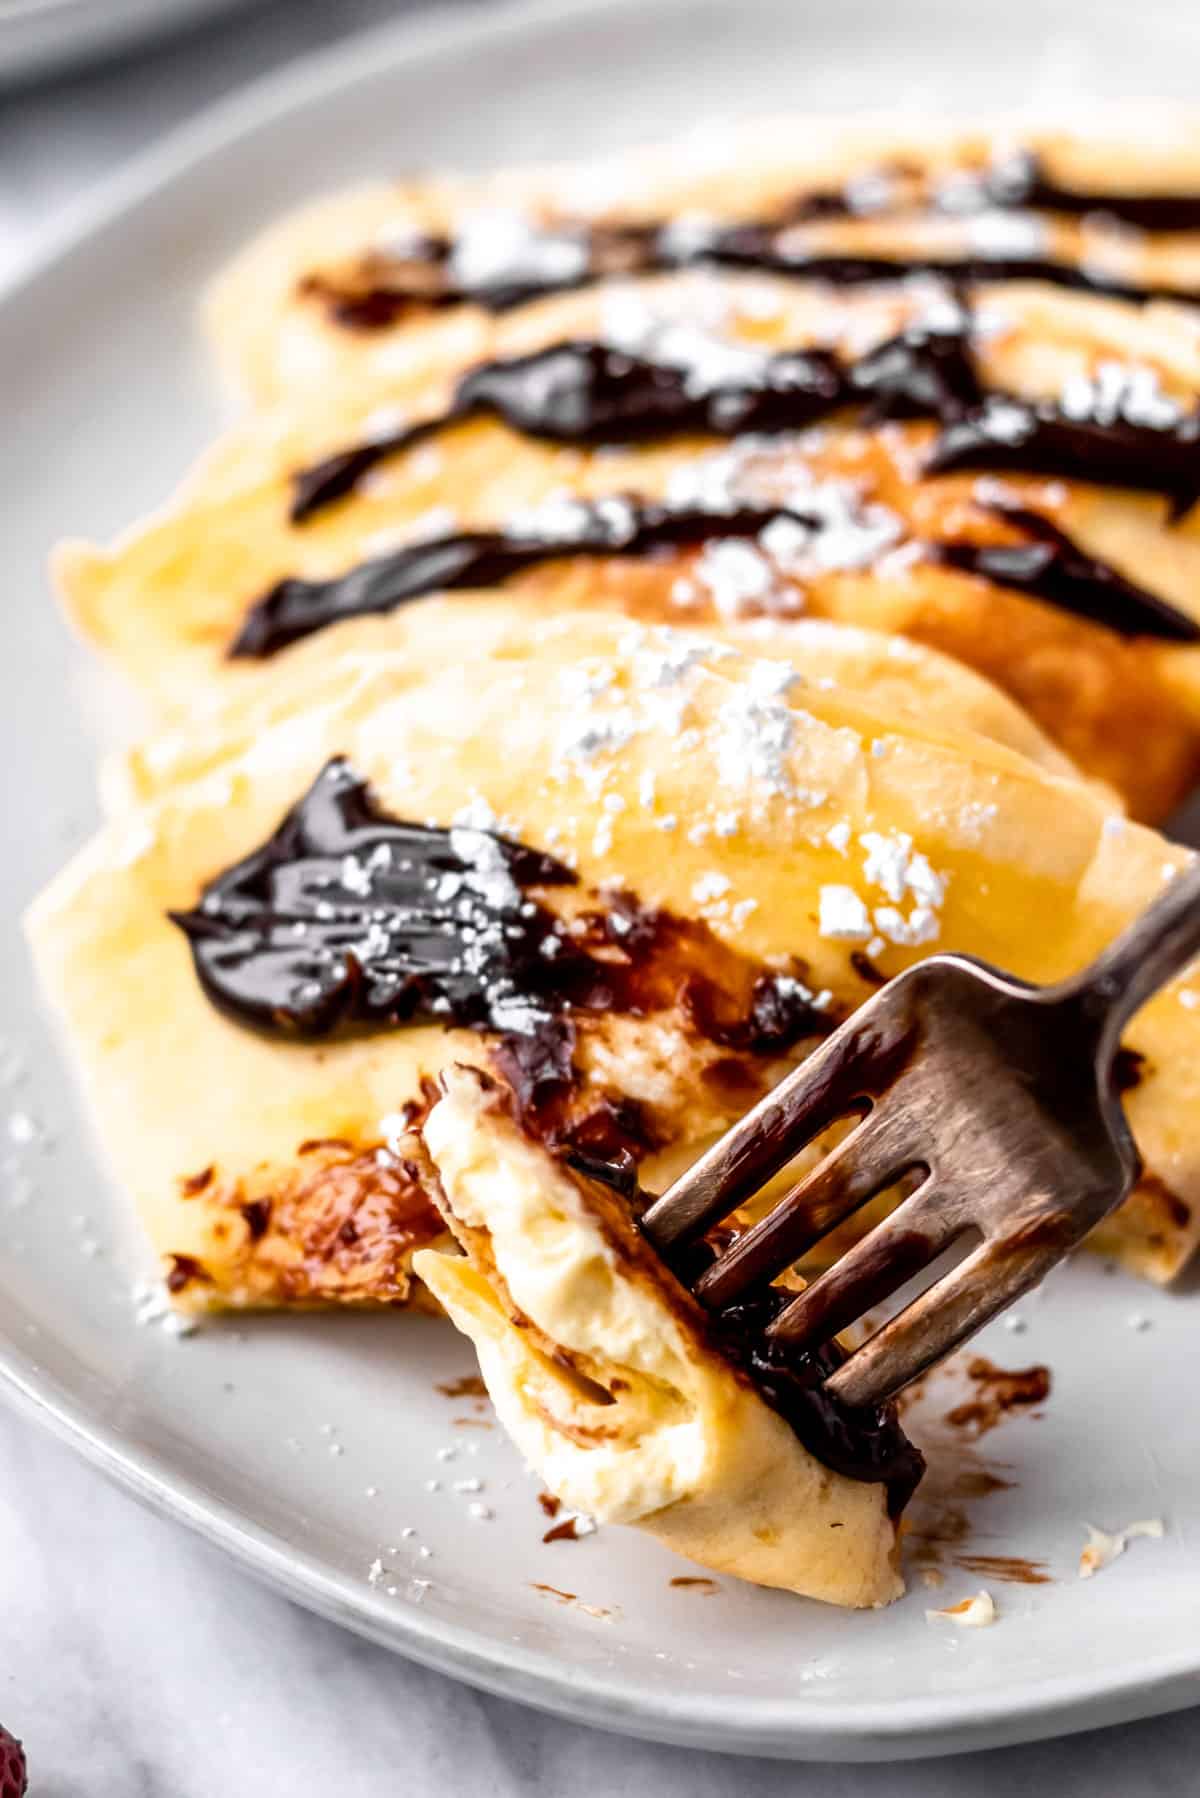 Crepes filled with pastry cream.